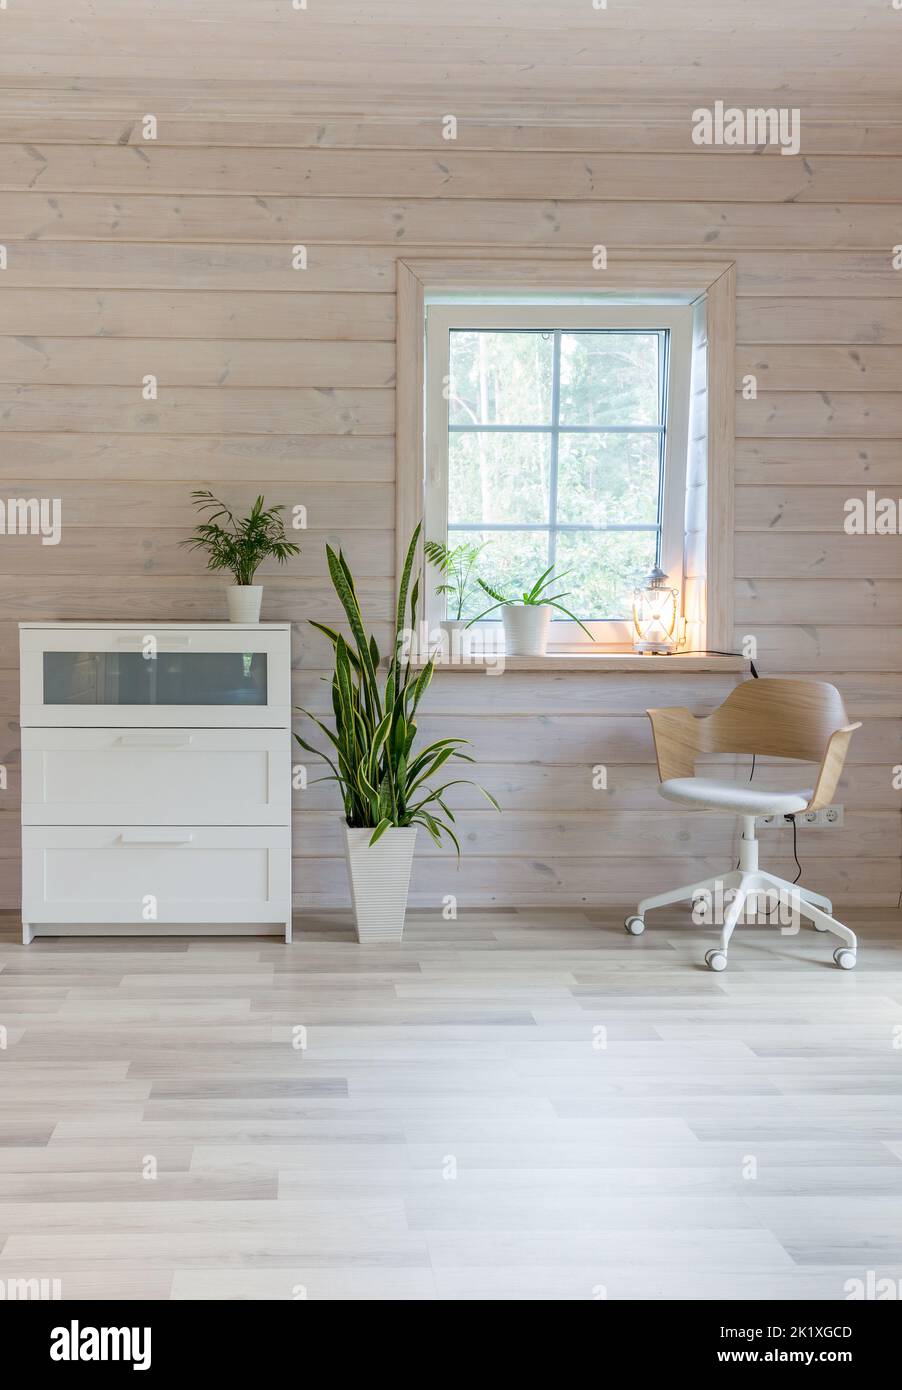 Stylish Scandinavian living room or bedroom with designer furniture, plants, dresser and chair. Wooden light finishing of walls and floor. Stock Photo